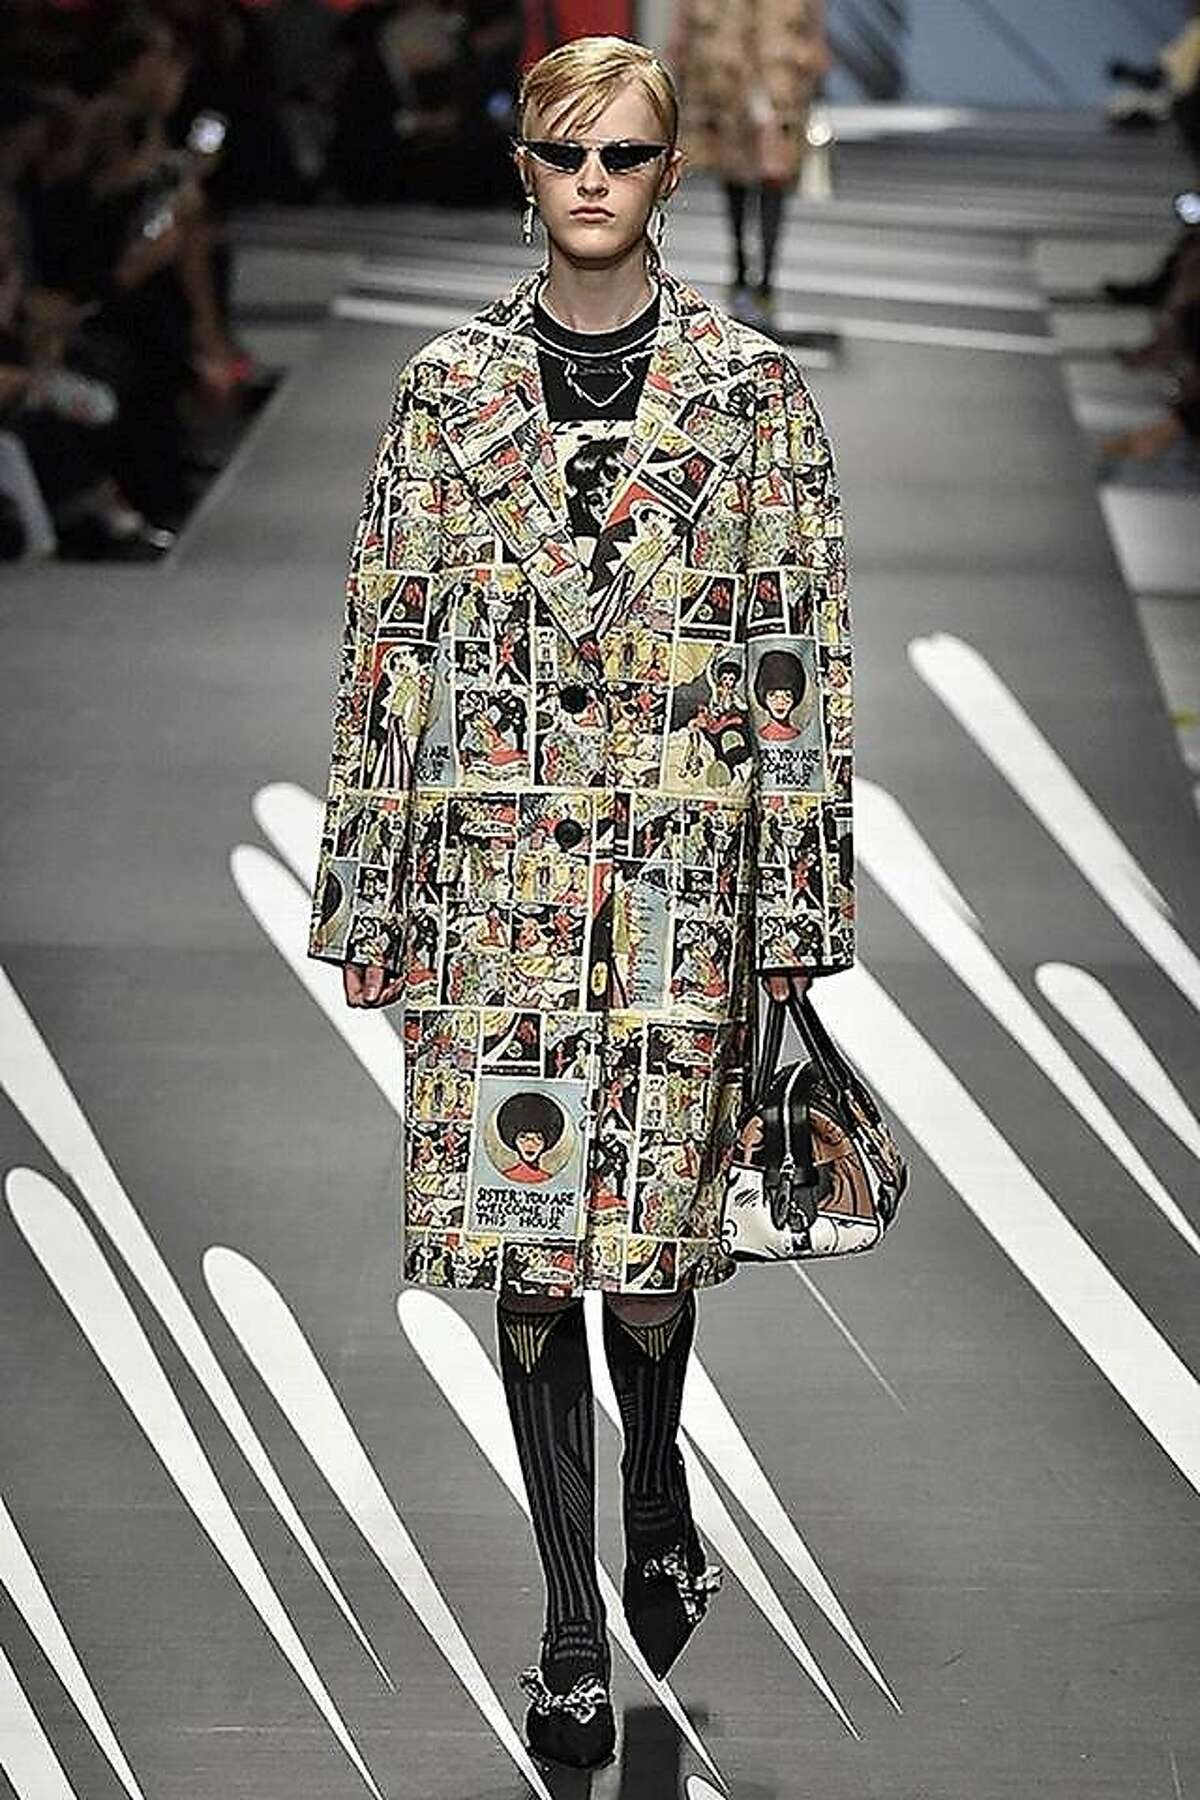 Prada coat with print derived from Trina Robbins' drawings